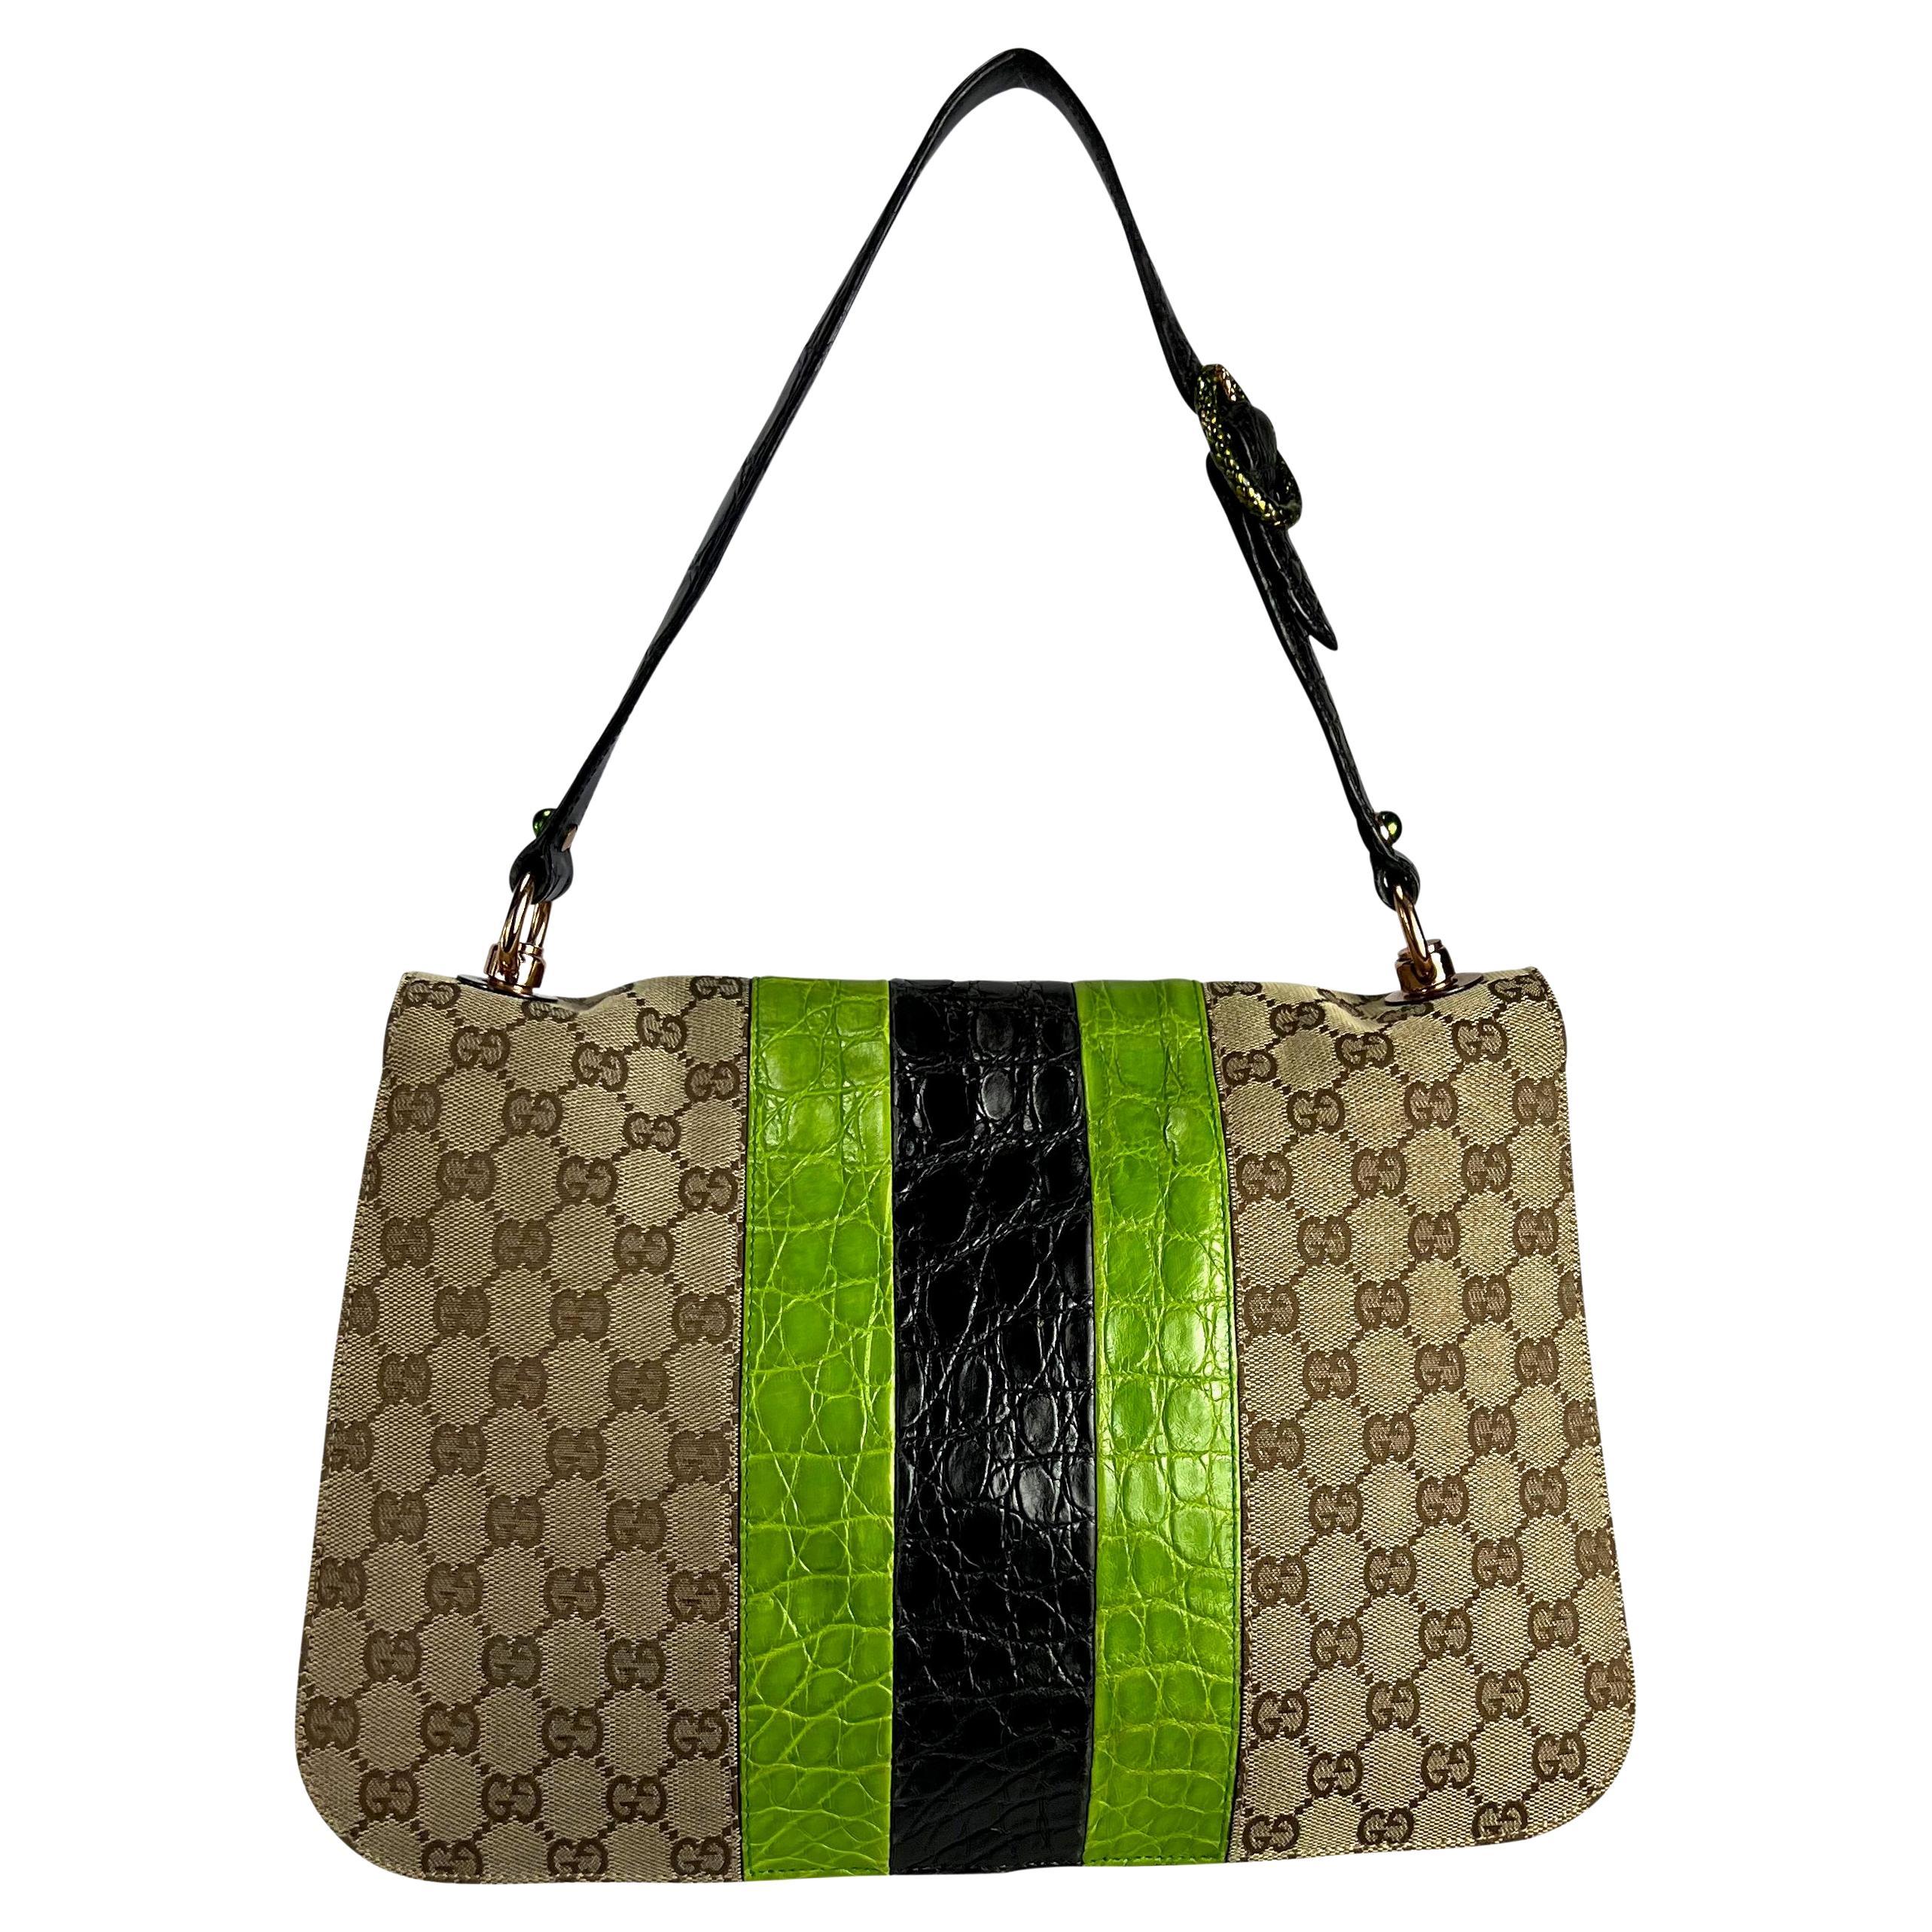 S/S 2004 Gucci by Tom Ford Green Crocodile Accented GG Canvas Snake Shoulder Bag 1